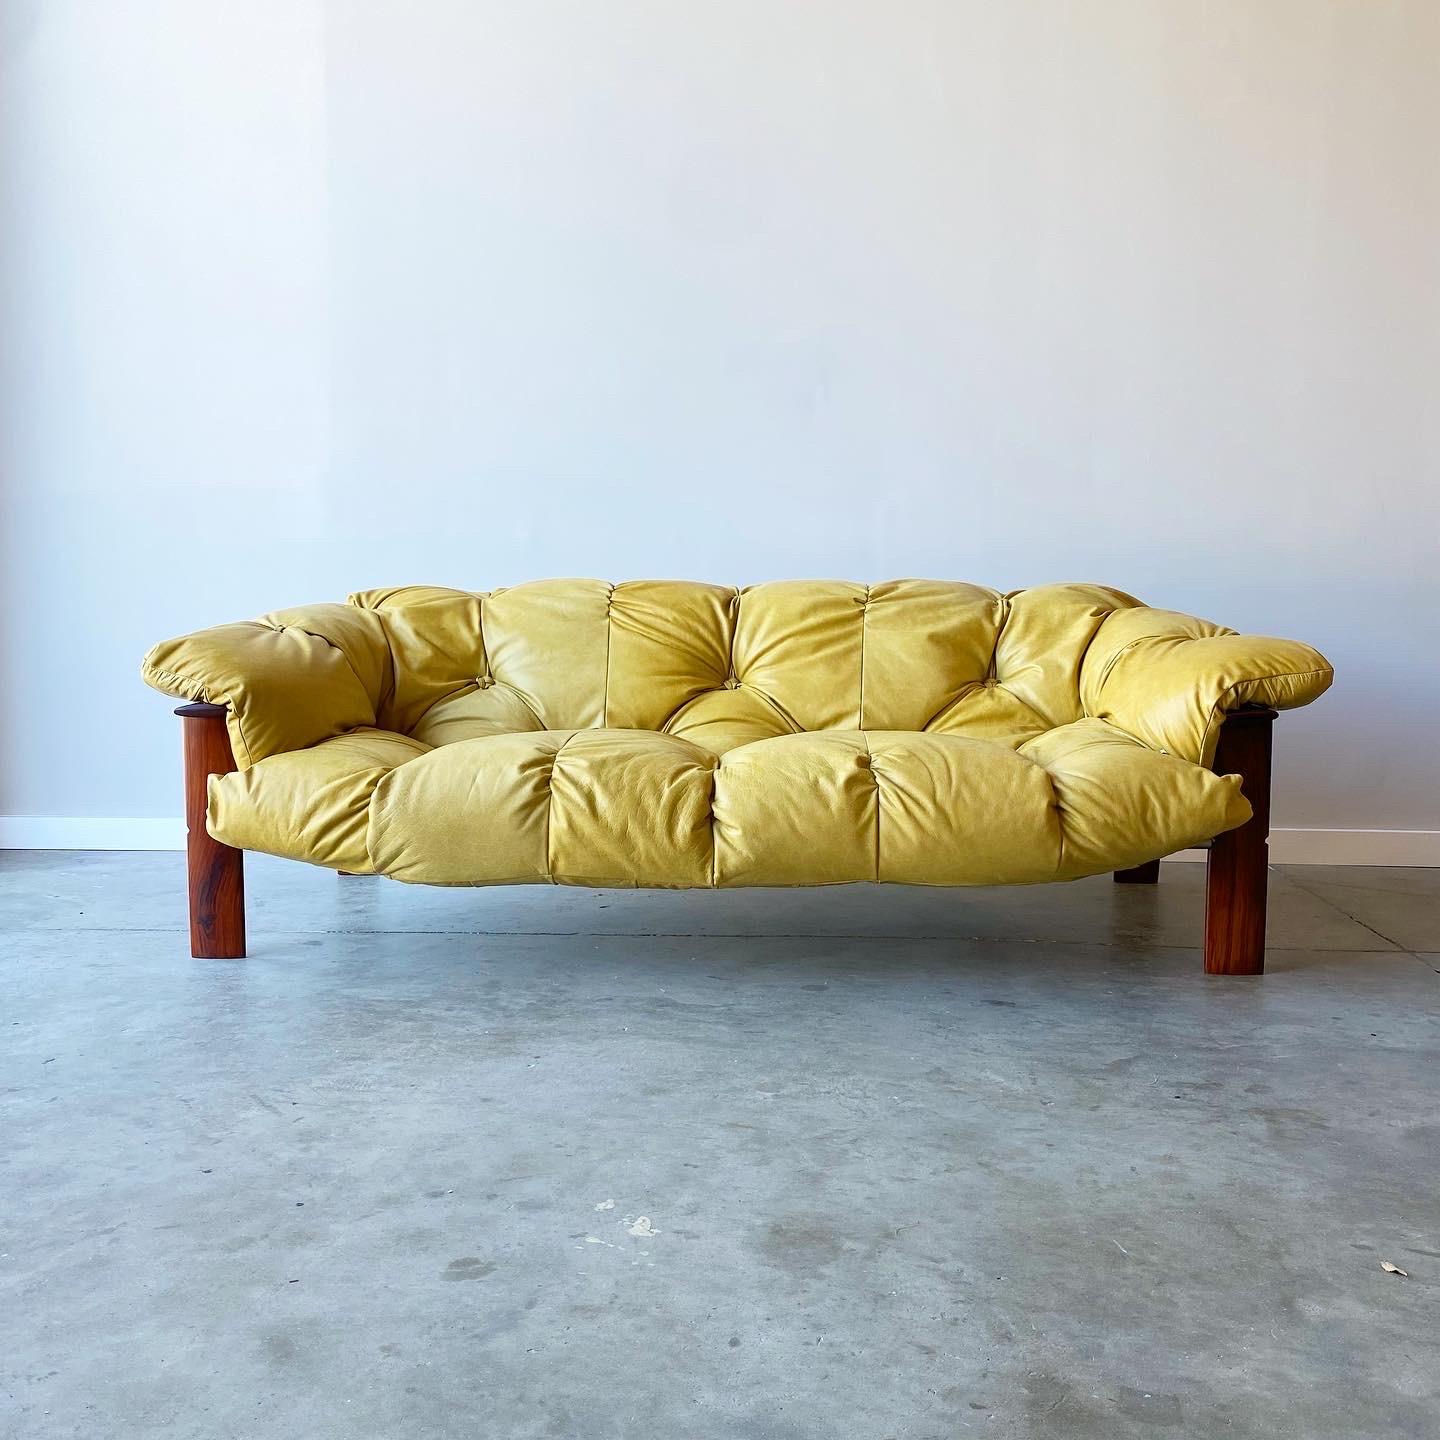 A stunning and rare example designed by Percival Lafer.  This sofa and ottoman have been fully restored with new leather and refinished Jacaranda frame.  The leather straps are in good original condition.  

A striking deep stance and extremely